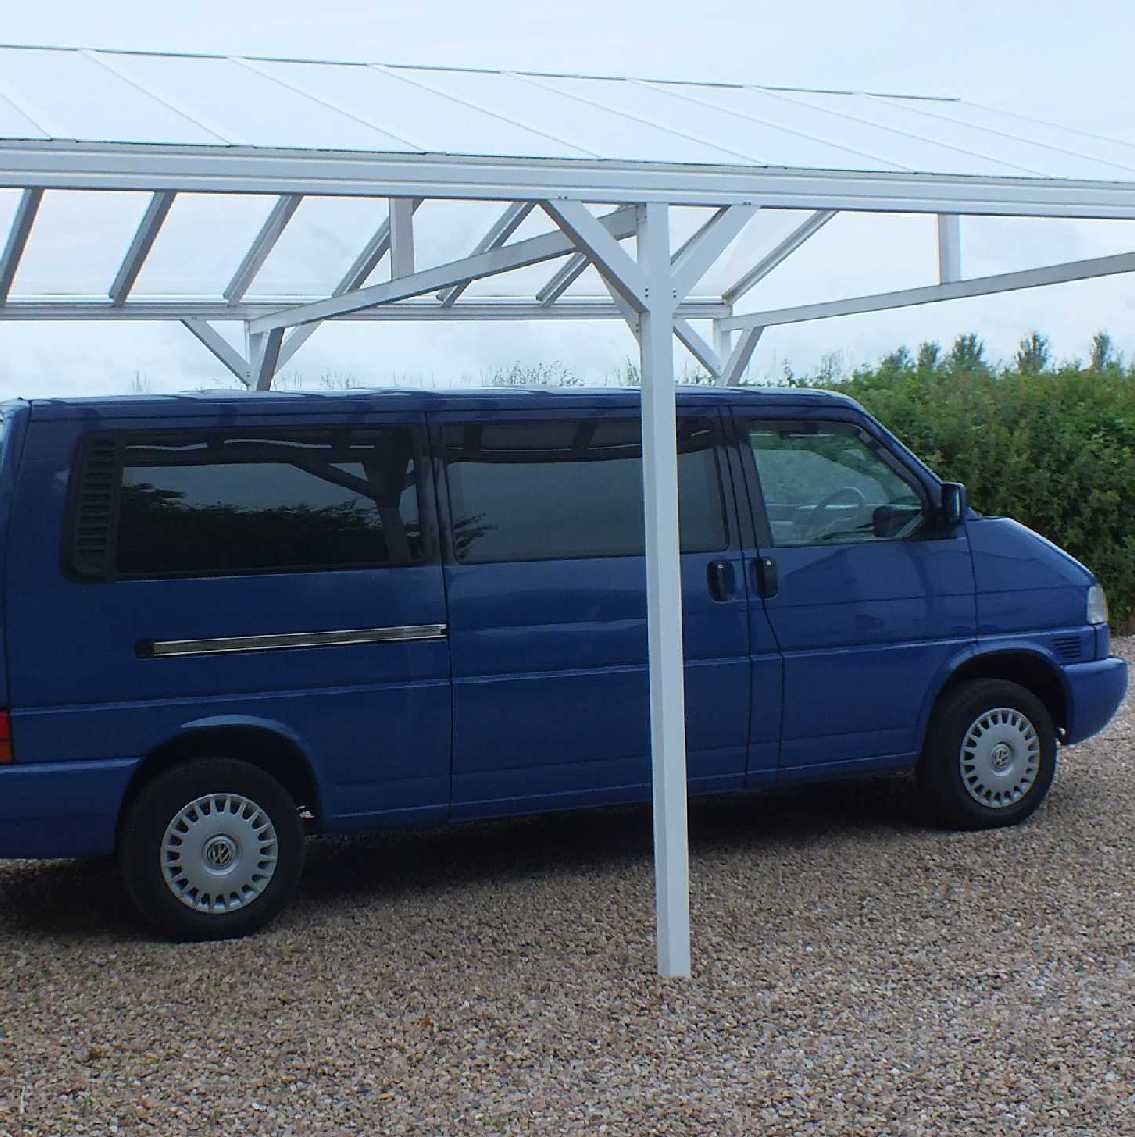 Great deals on Omega Smart Free-Standing, White Gable-Roof (type 1) Canopy with 16mm Polycarbonate Glazing - 7.4m (W) x 4.0m (P), (8) Supporting Posts